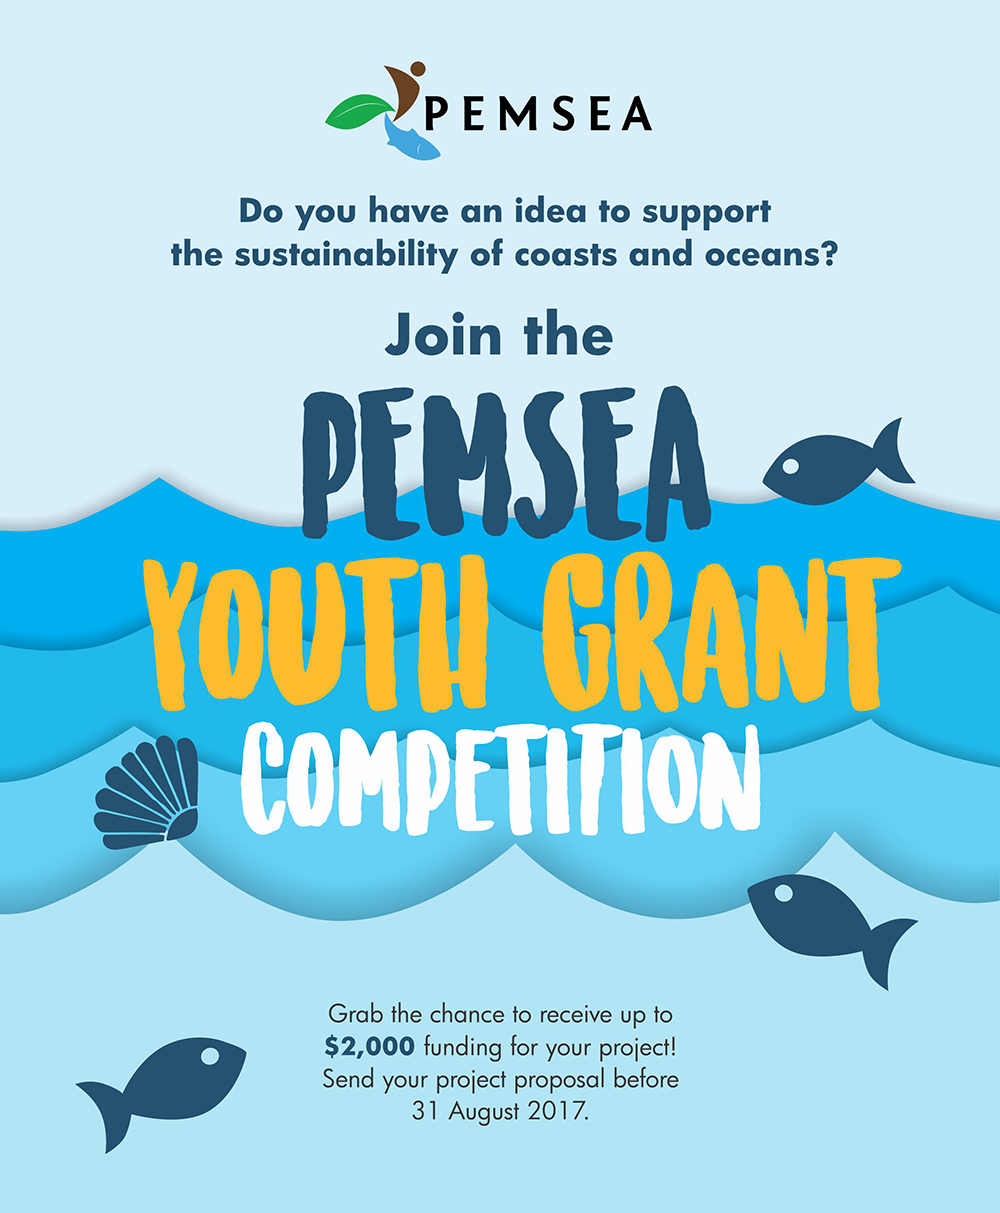 PEMSEA Launches Youth Grant Competition for 2017